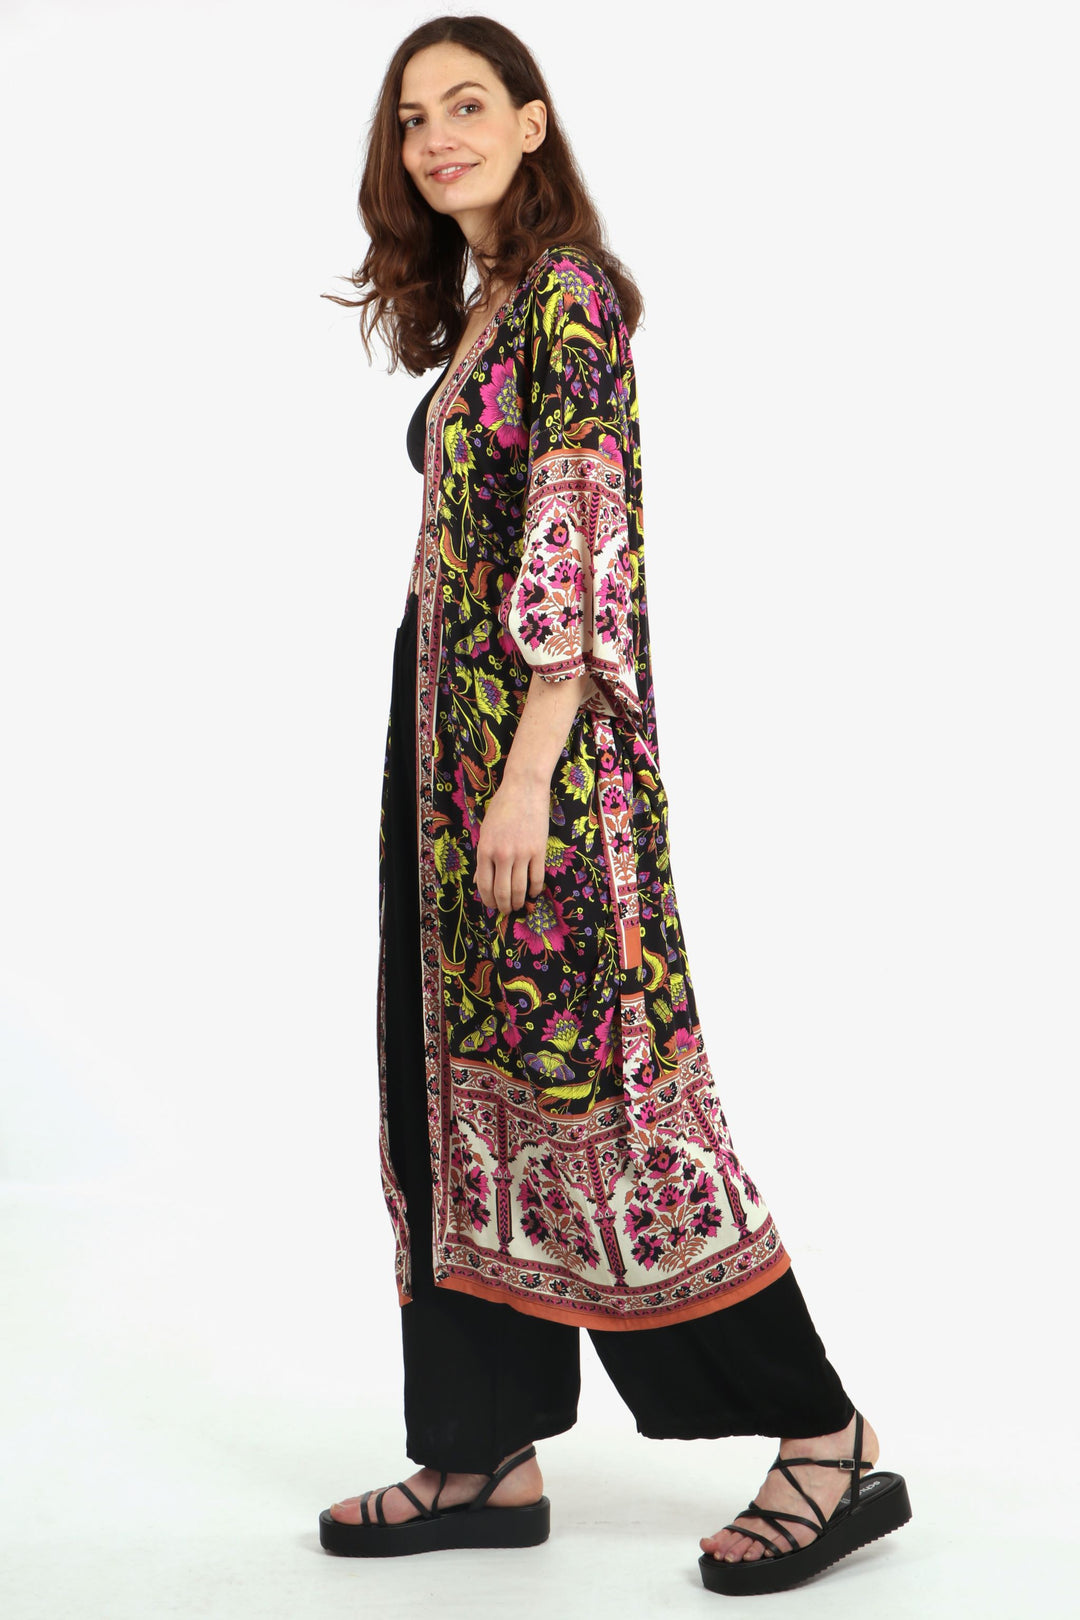 model wearing a black, pink and yellow ornate floral and butterfly patterned midi length kimono robe with 3/4 sleeves